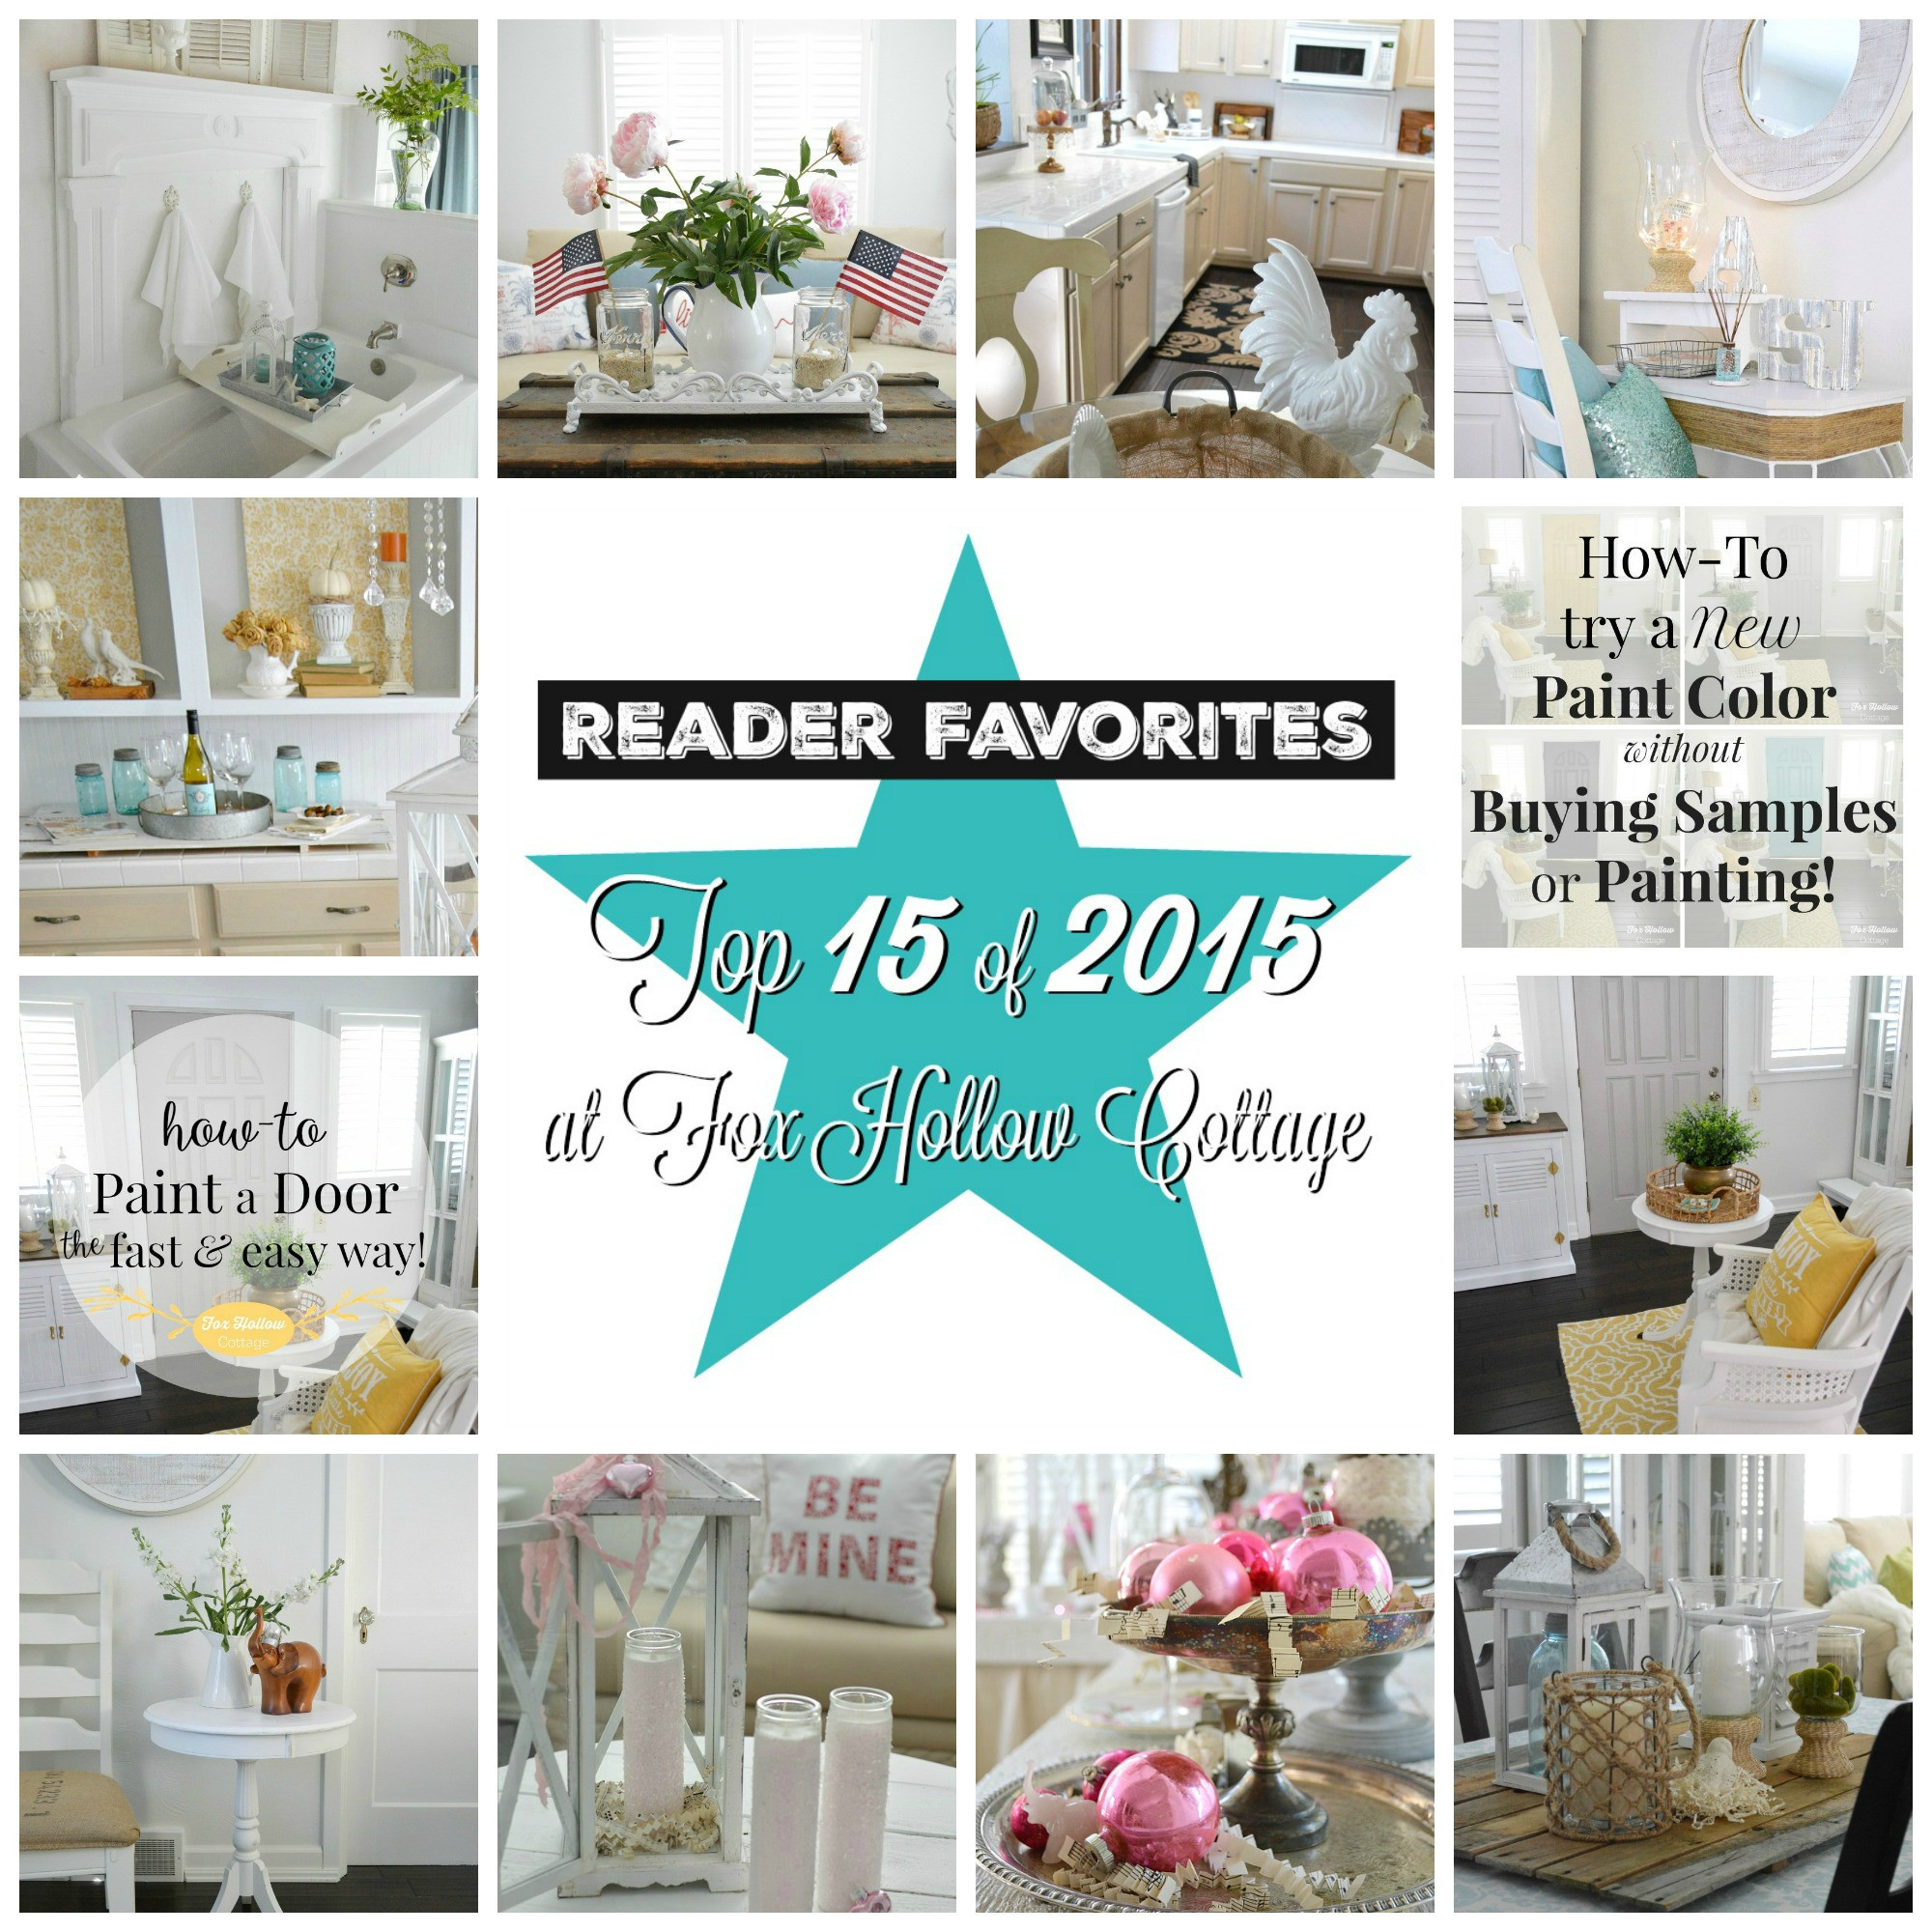 Home Project Ideas
 Top 15 DIY Craft and Home Decorating Projects of 2015